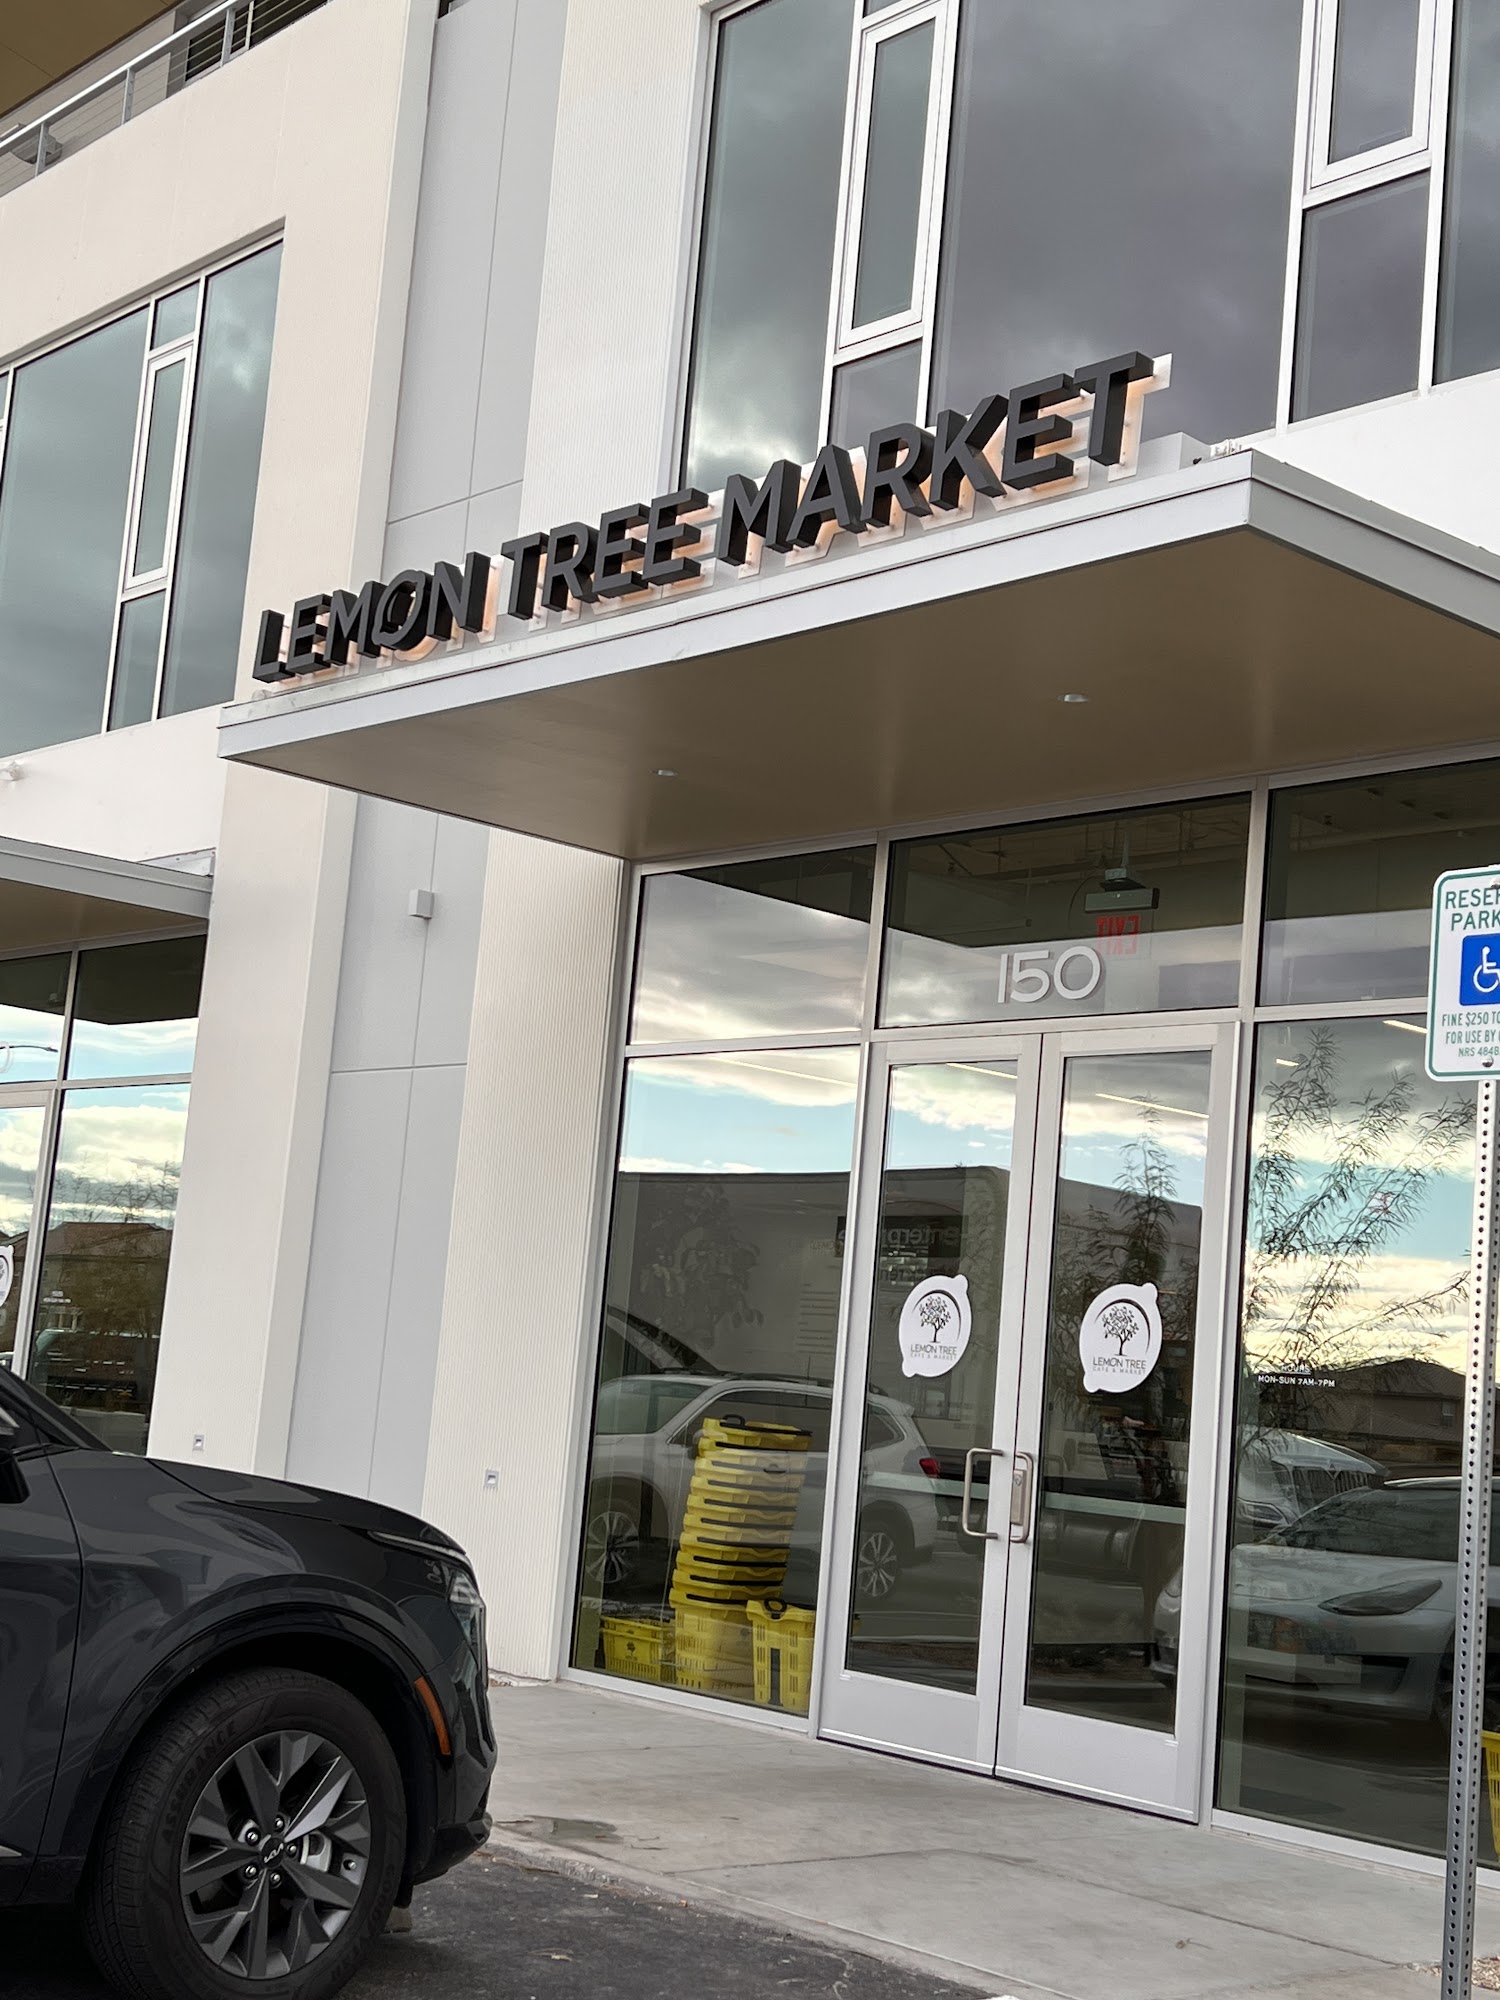 Lemon Tree Cafe and Grocery Store